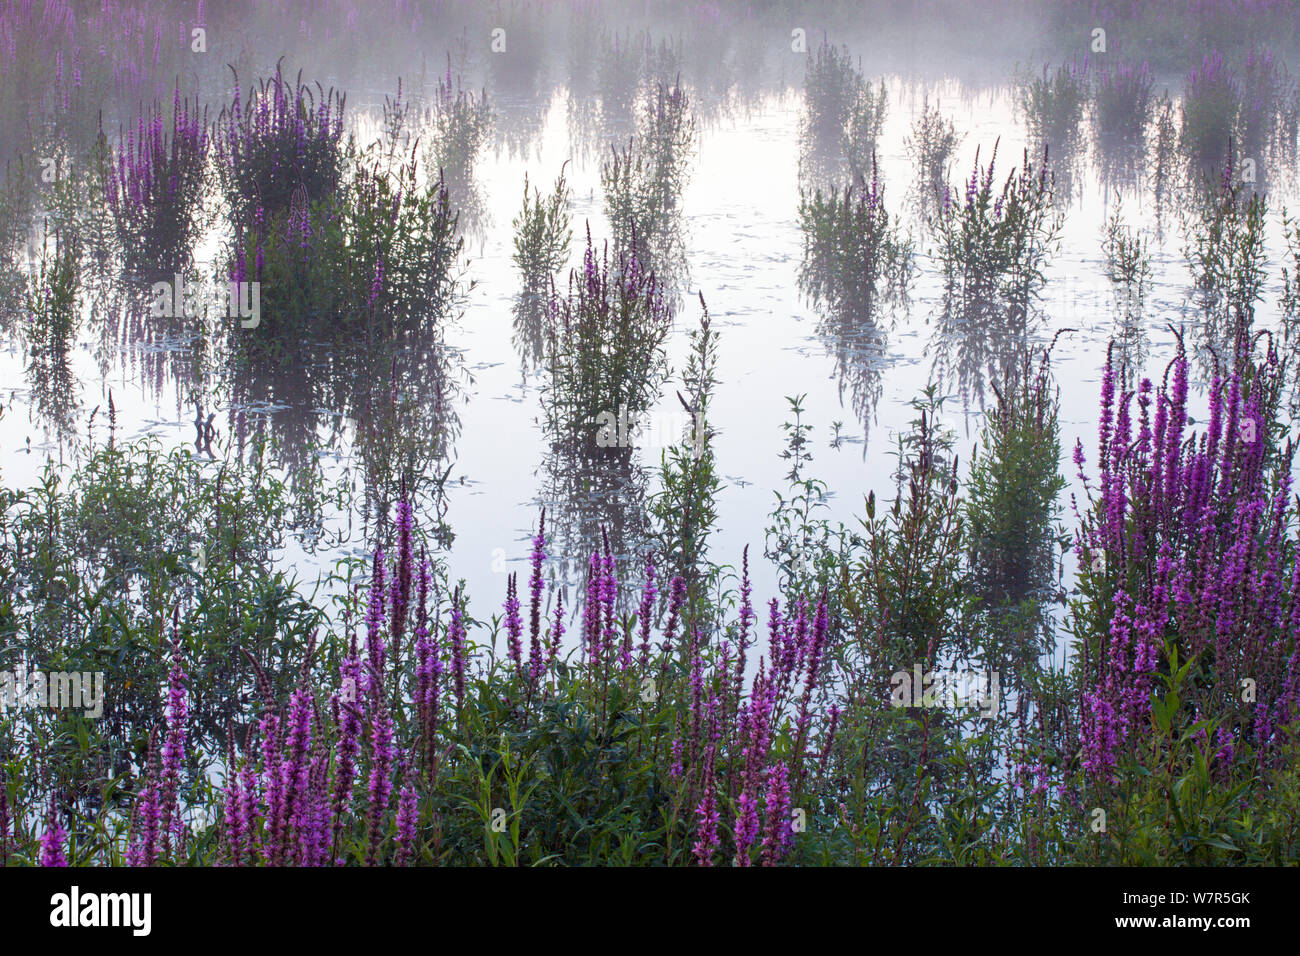 Purple loosestrife (Lythrum salicaria) flower in the water, Meinerswijk, the Netherlands, August 2007 Stock Photo